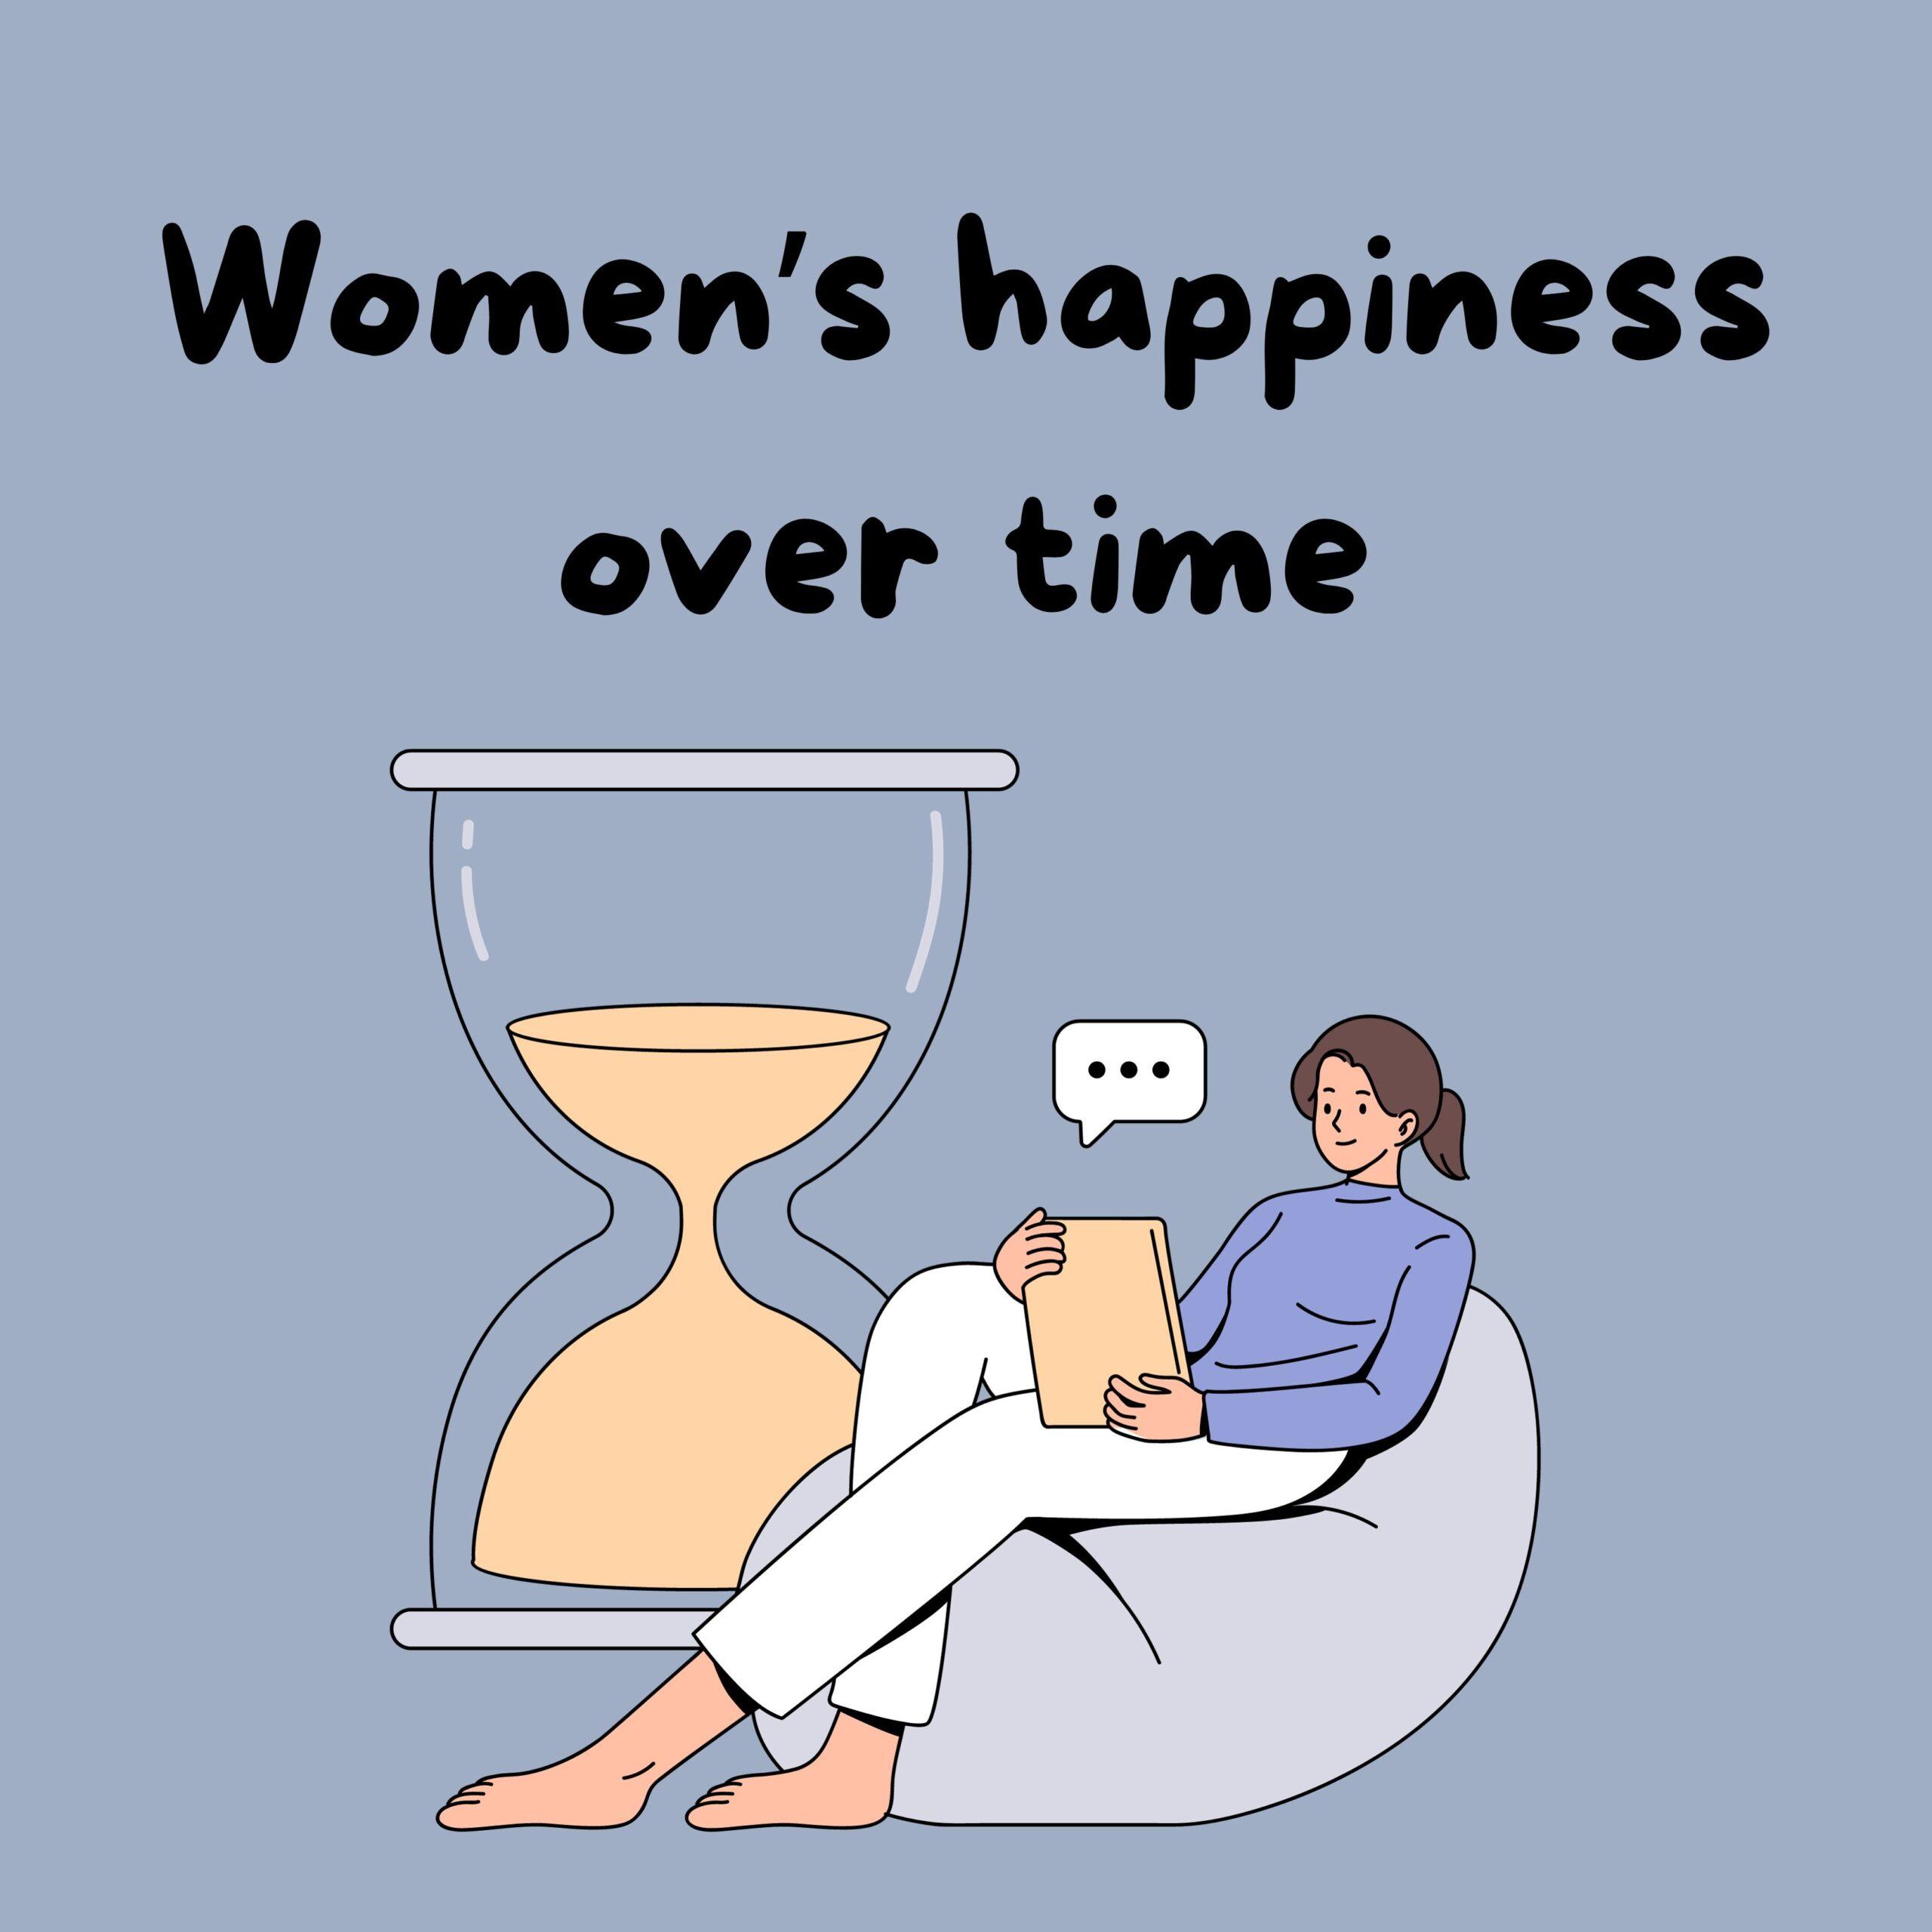 Women’s happiness over time